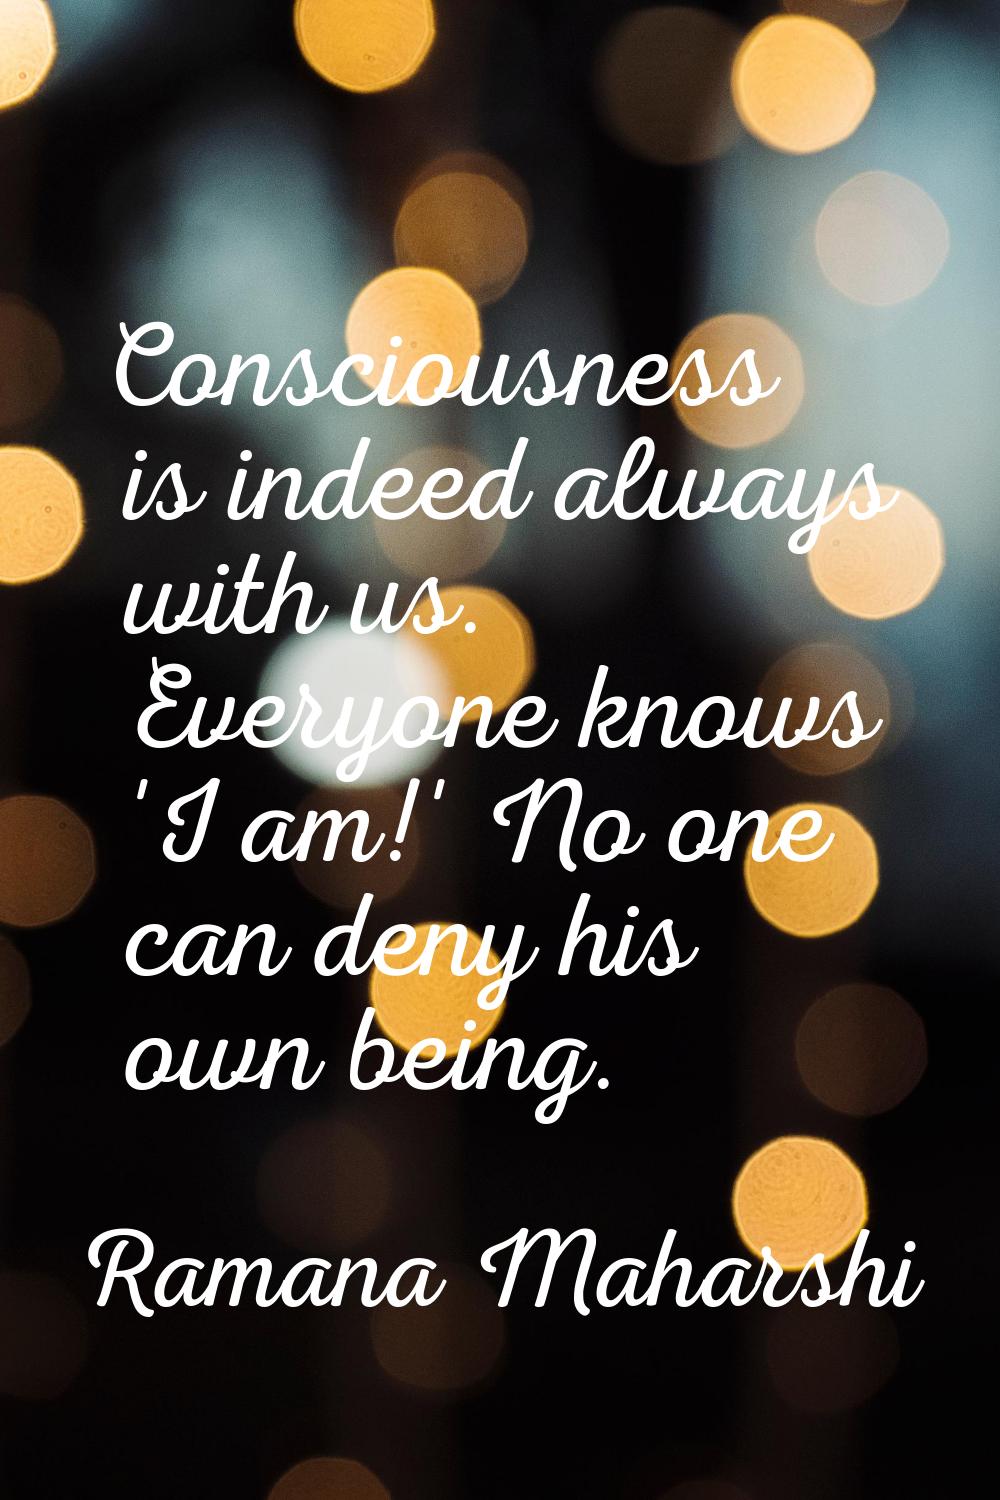 Consciousness is indeed always with us. Everyone knows 'I am!' No one can deny his own being.